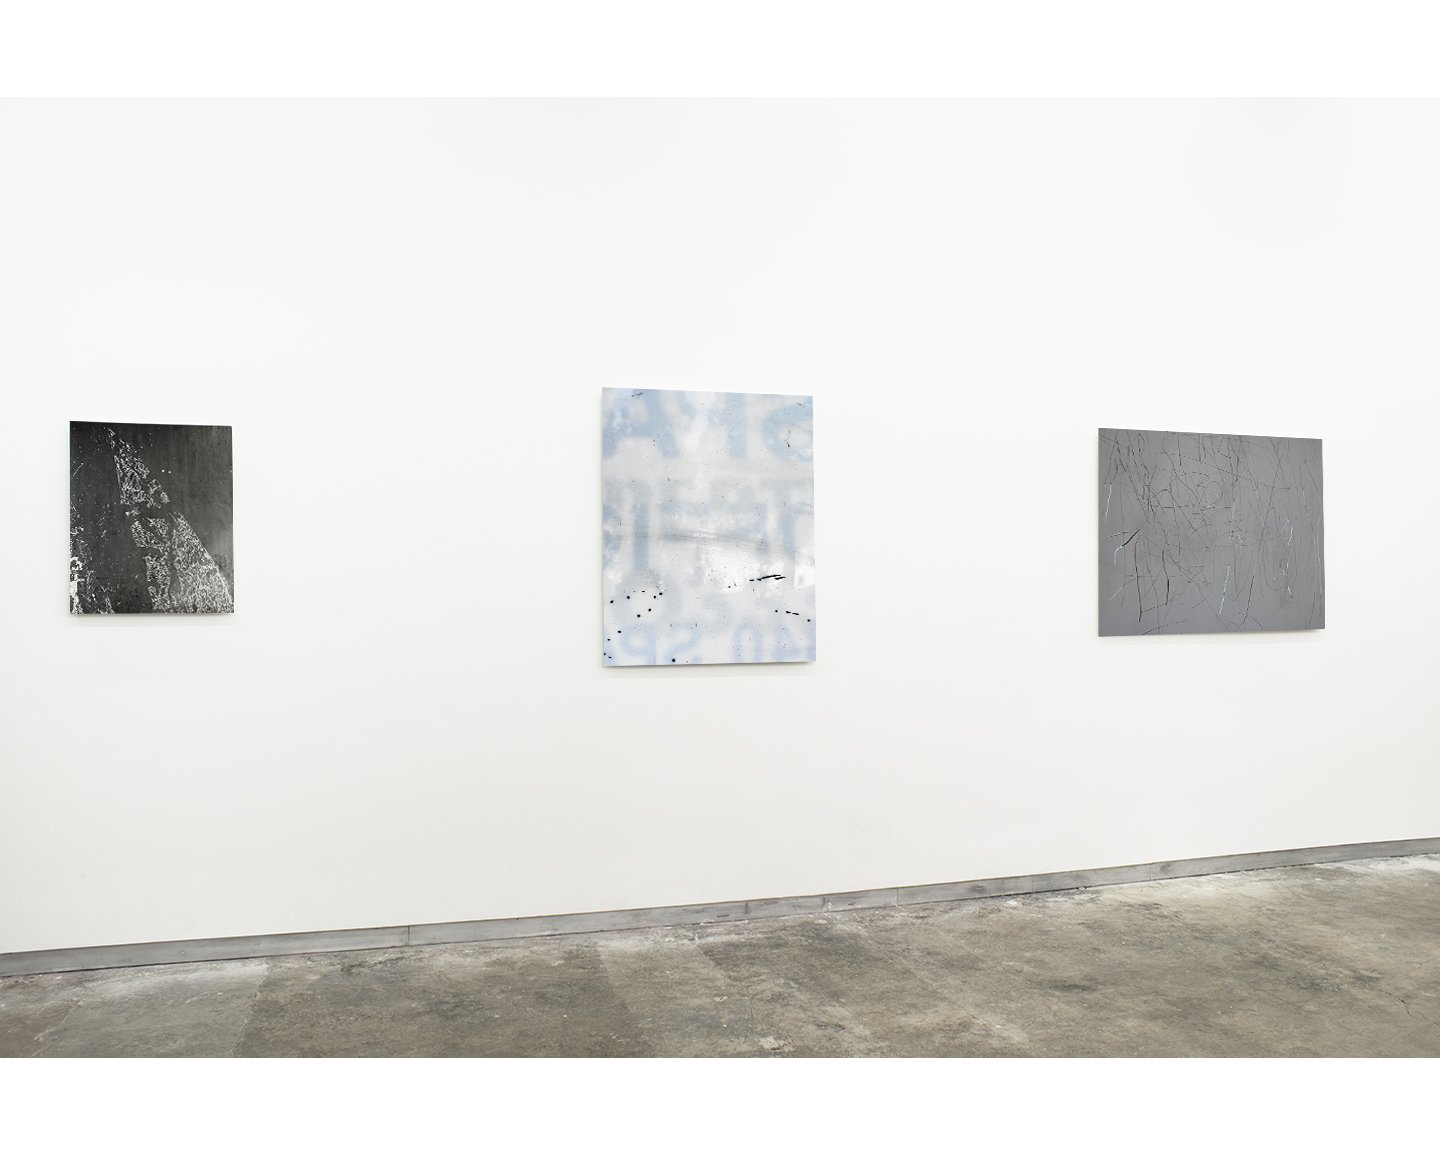  Installation View  Low Relief  Kate Werble Gallery, New York February - March 2013 